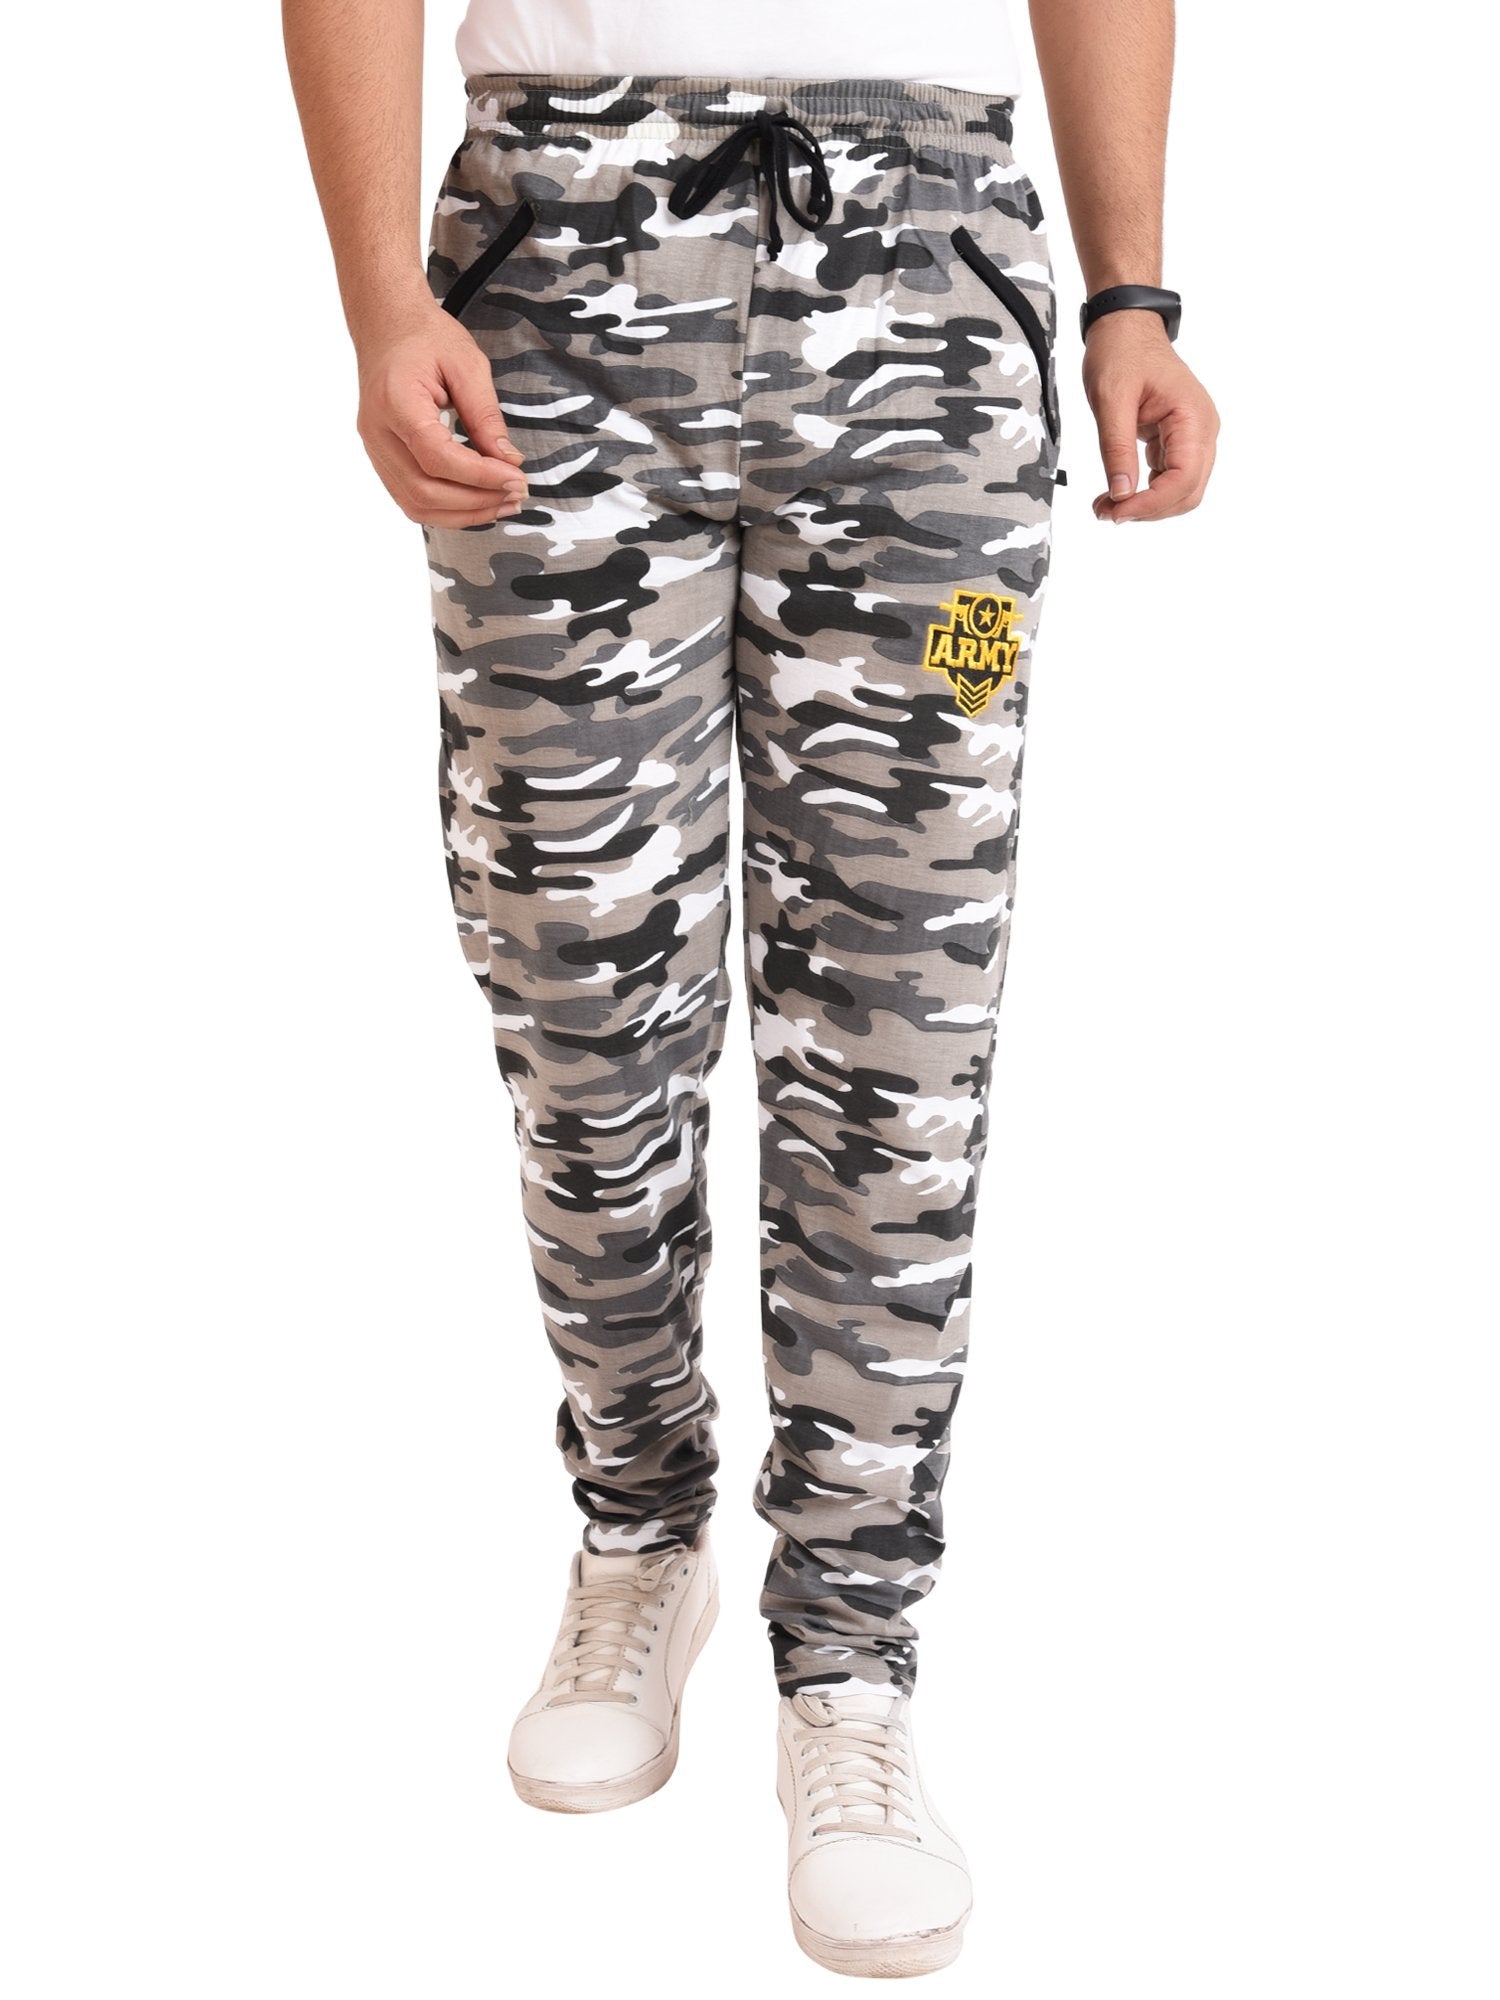 Allywit Mens Casual M4XL Cotton Woven Camouflage Camo Joggers Jogger Pants  Sweatpants Gray XLarge  Amazonin Clothing  Accessories